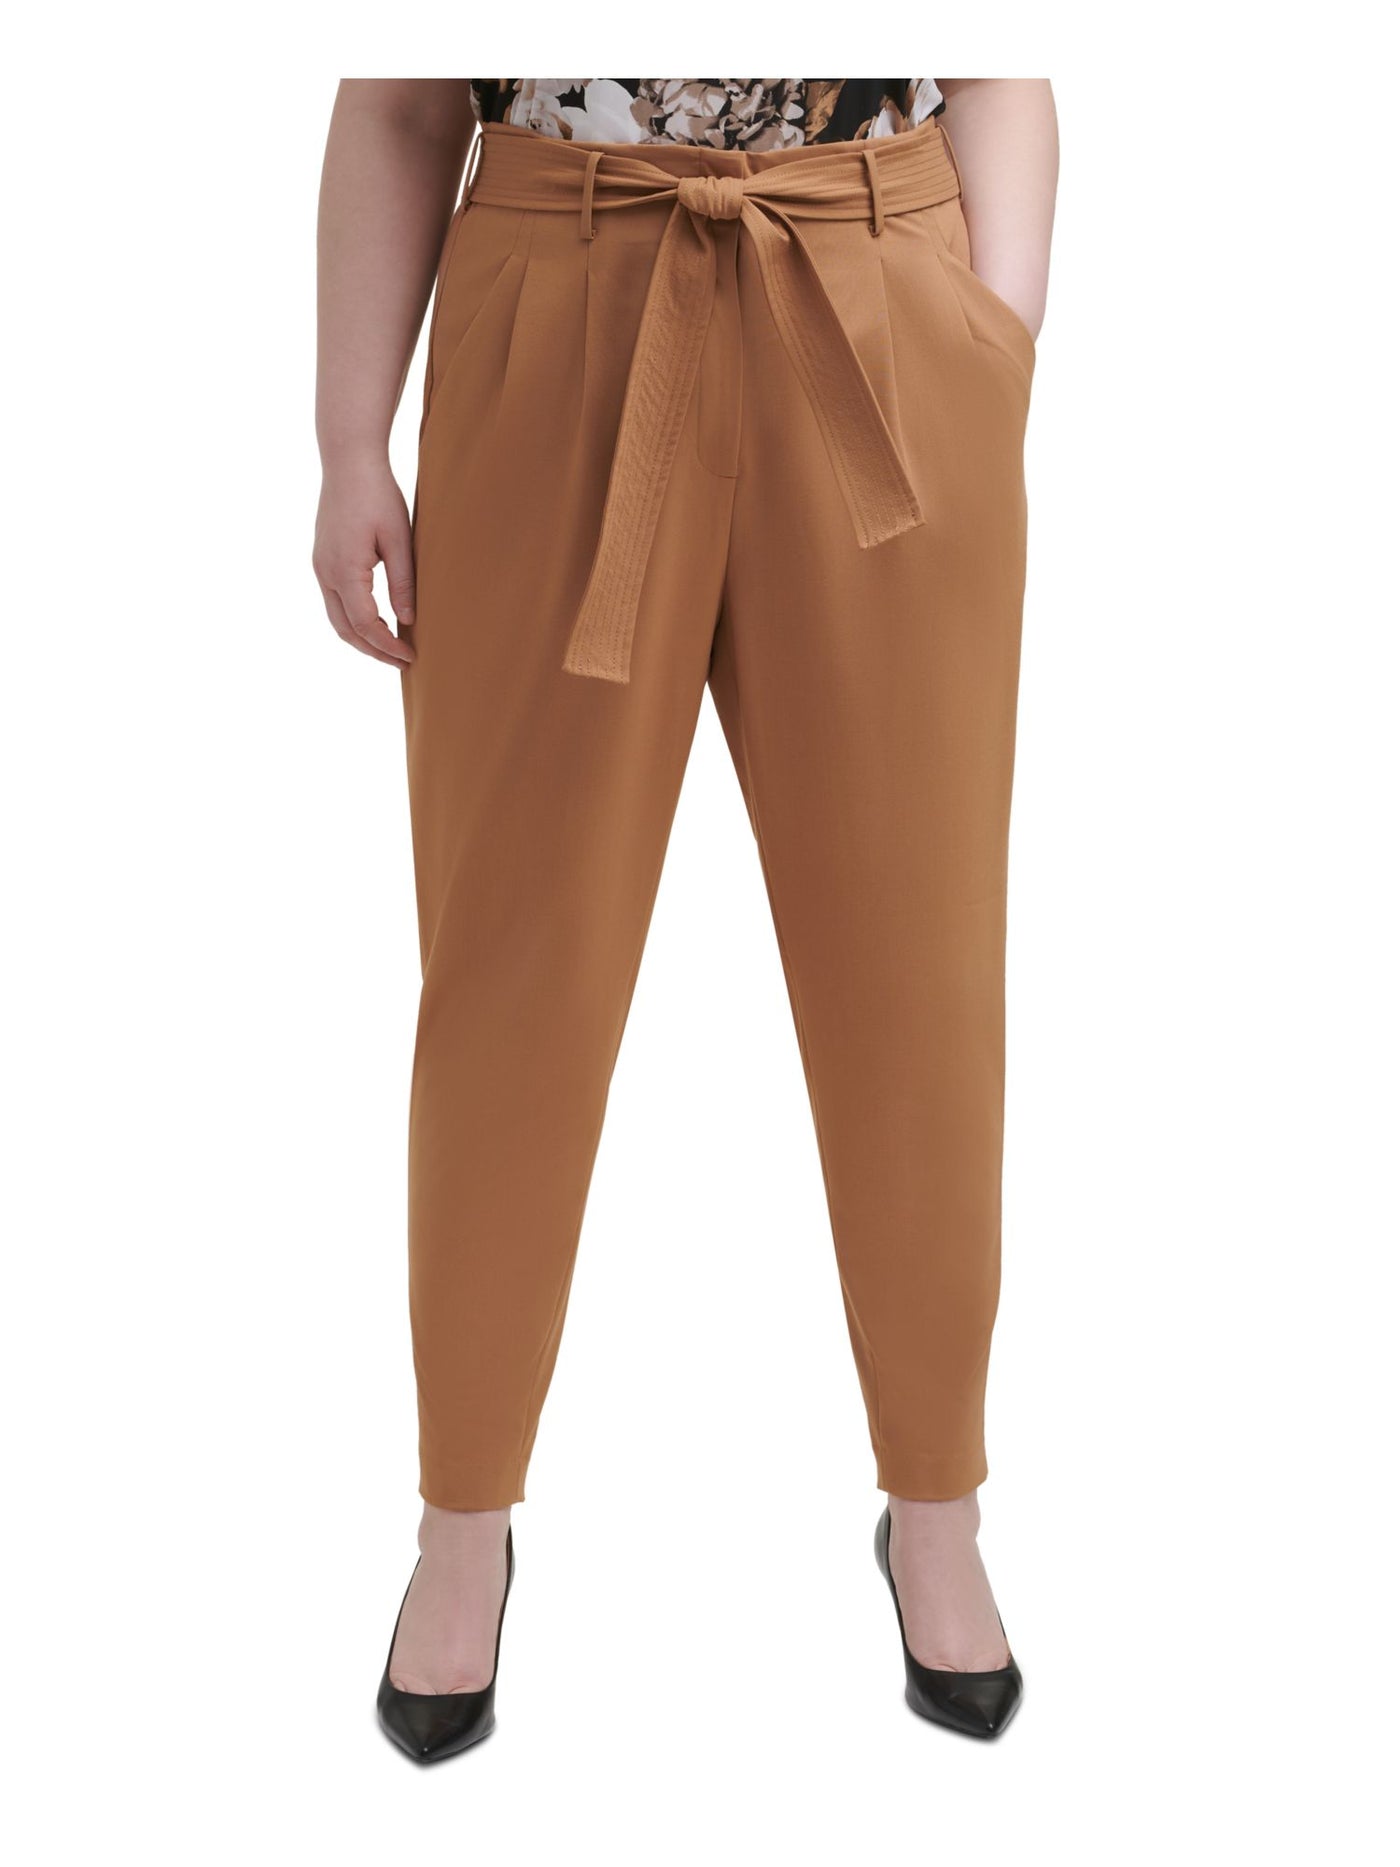 CALVIN KLEIN Womens Beige Stretch Pleated Belted Mid Rise Ankle-length Wear To Work Pants Plus 16W